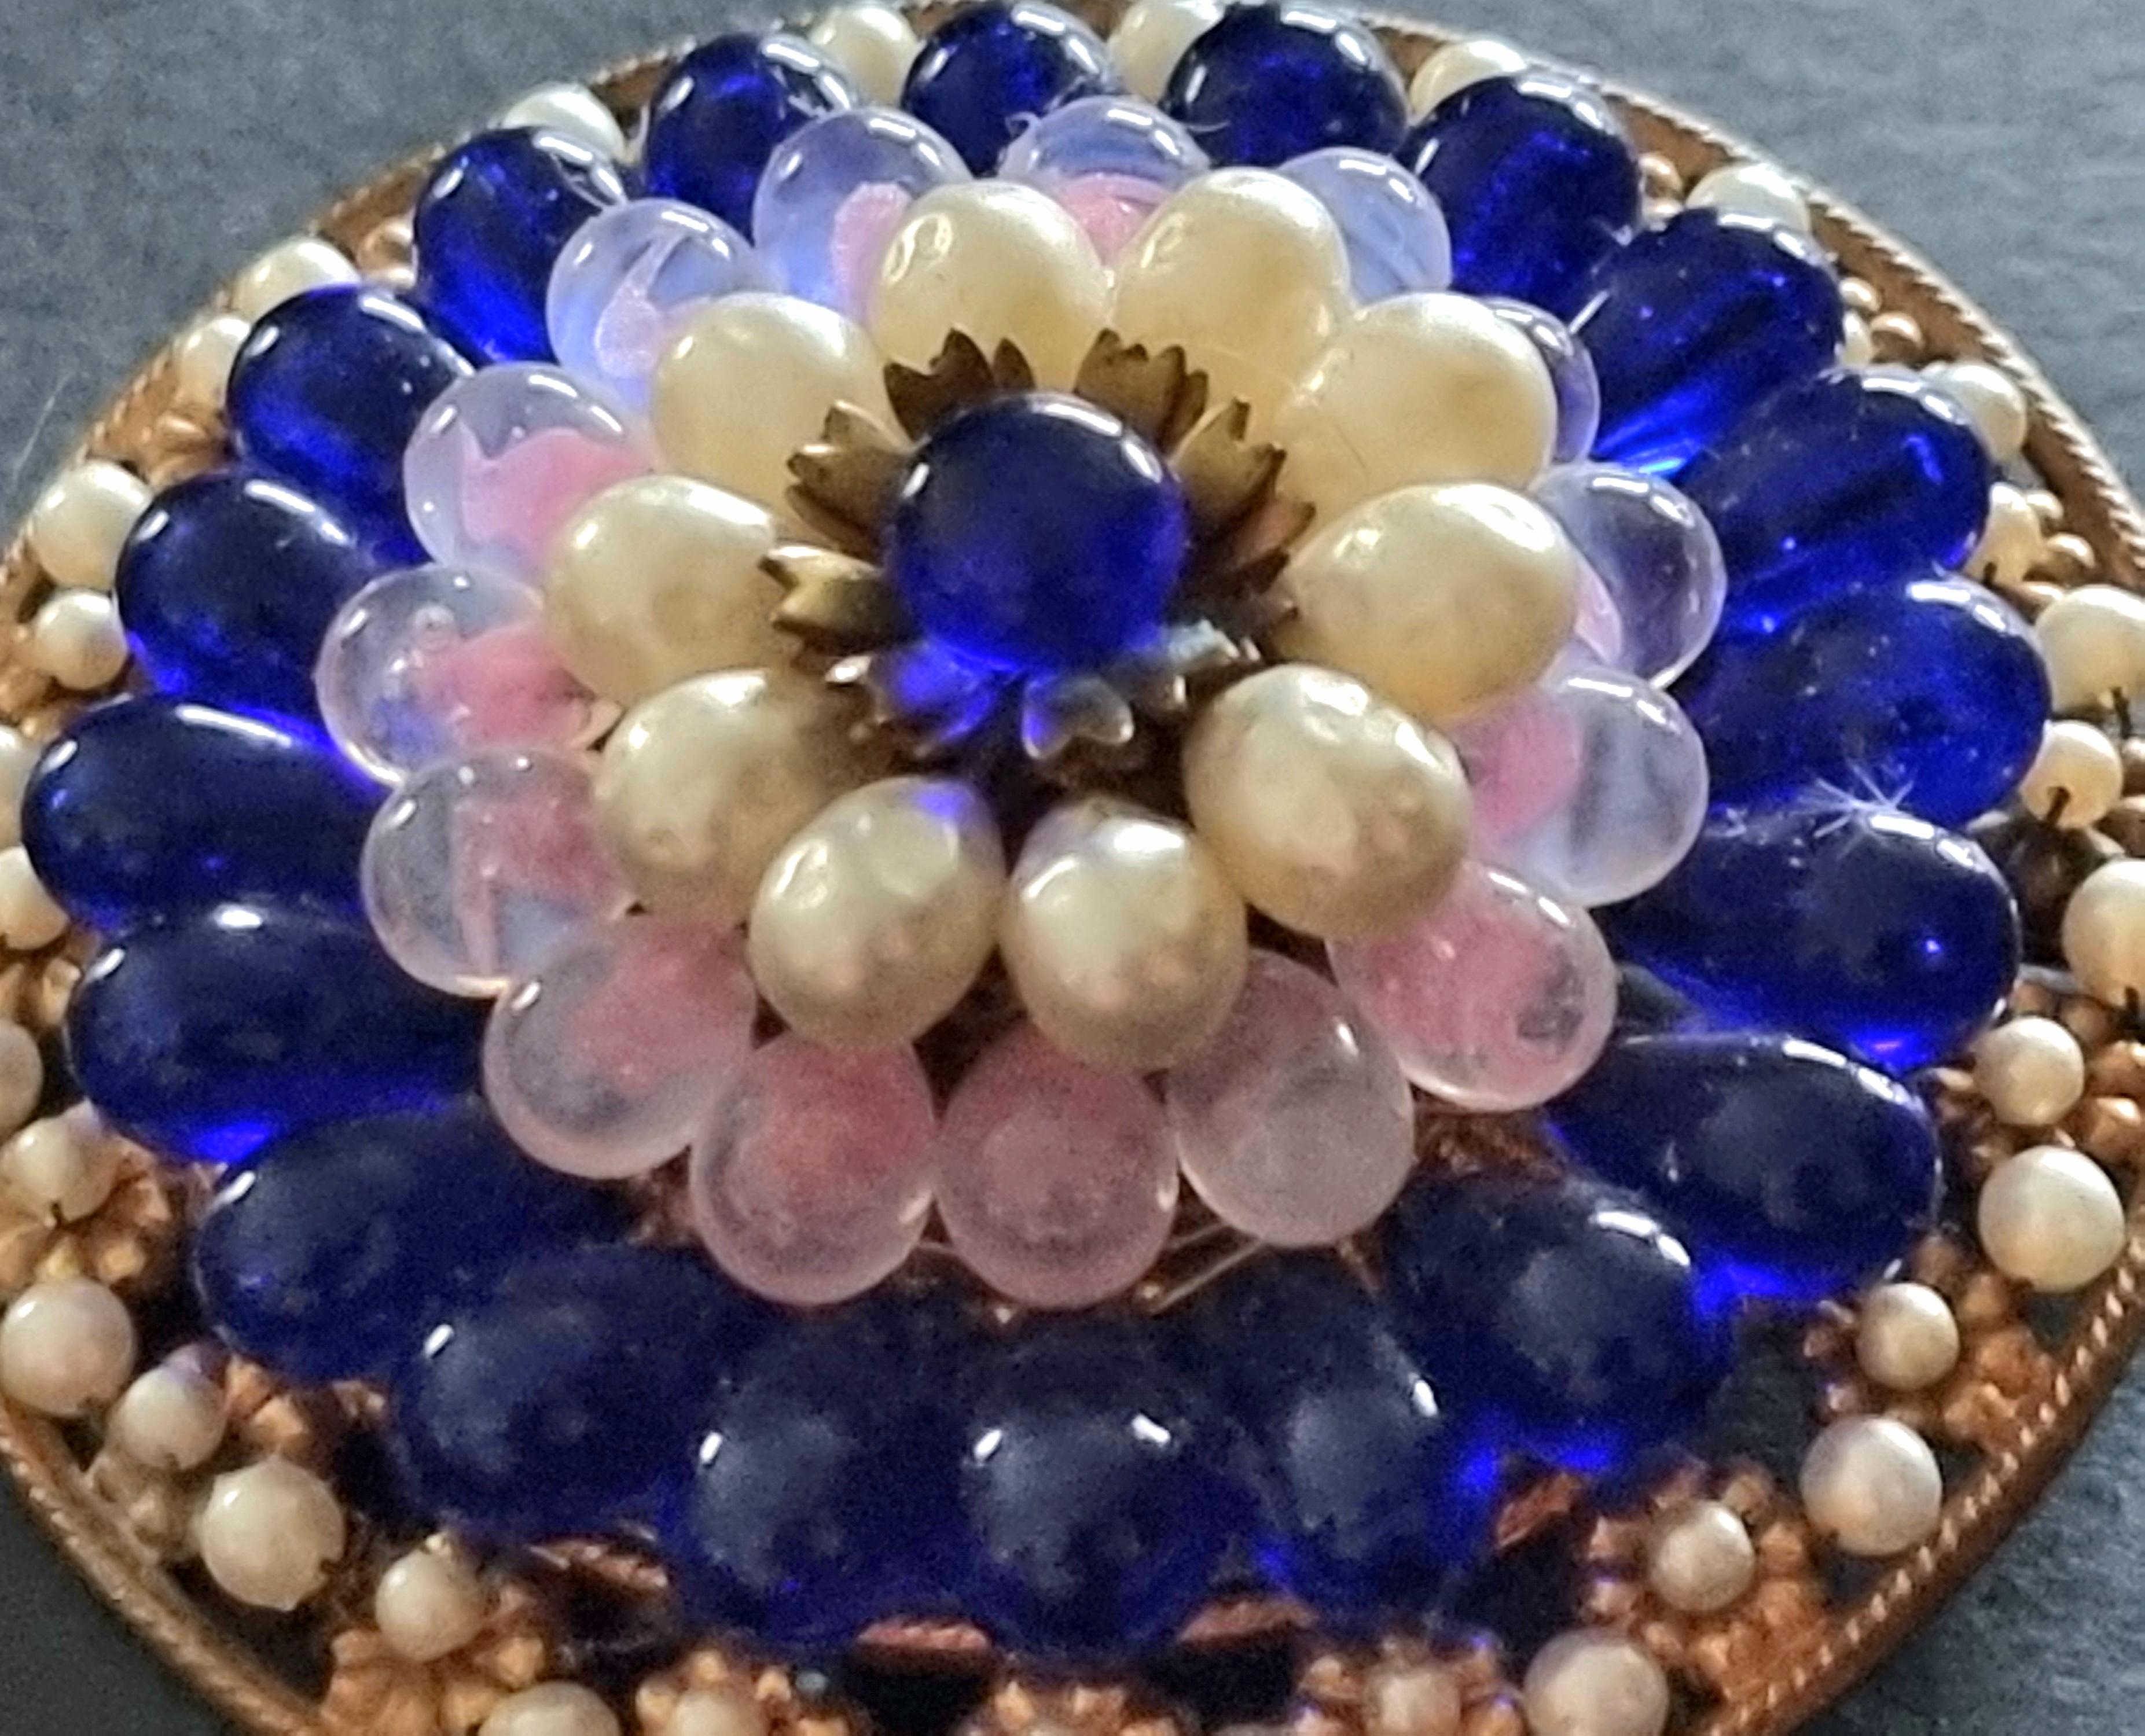 Sublime large old BROOCH,
vintage from the 50s,
made of glass beads, exquisite workmanship,
exceptional work of famous jeweler Louis Rousselet,
diameter 5.8 cm,
collector's item,
good condition.

A child of Ménilmontant and the popular suburbs of